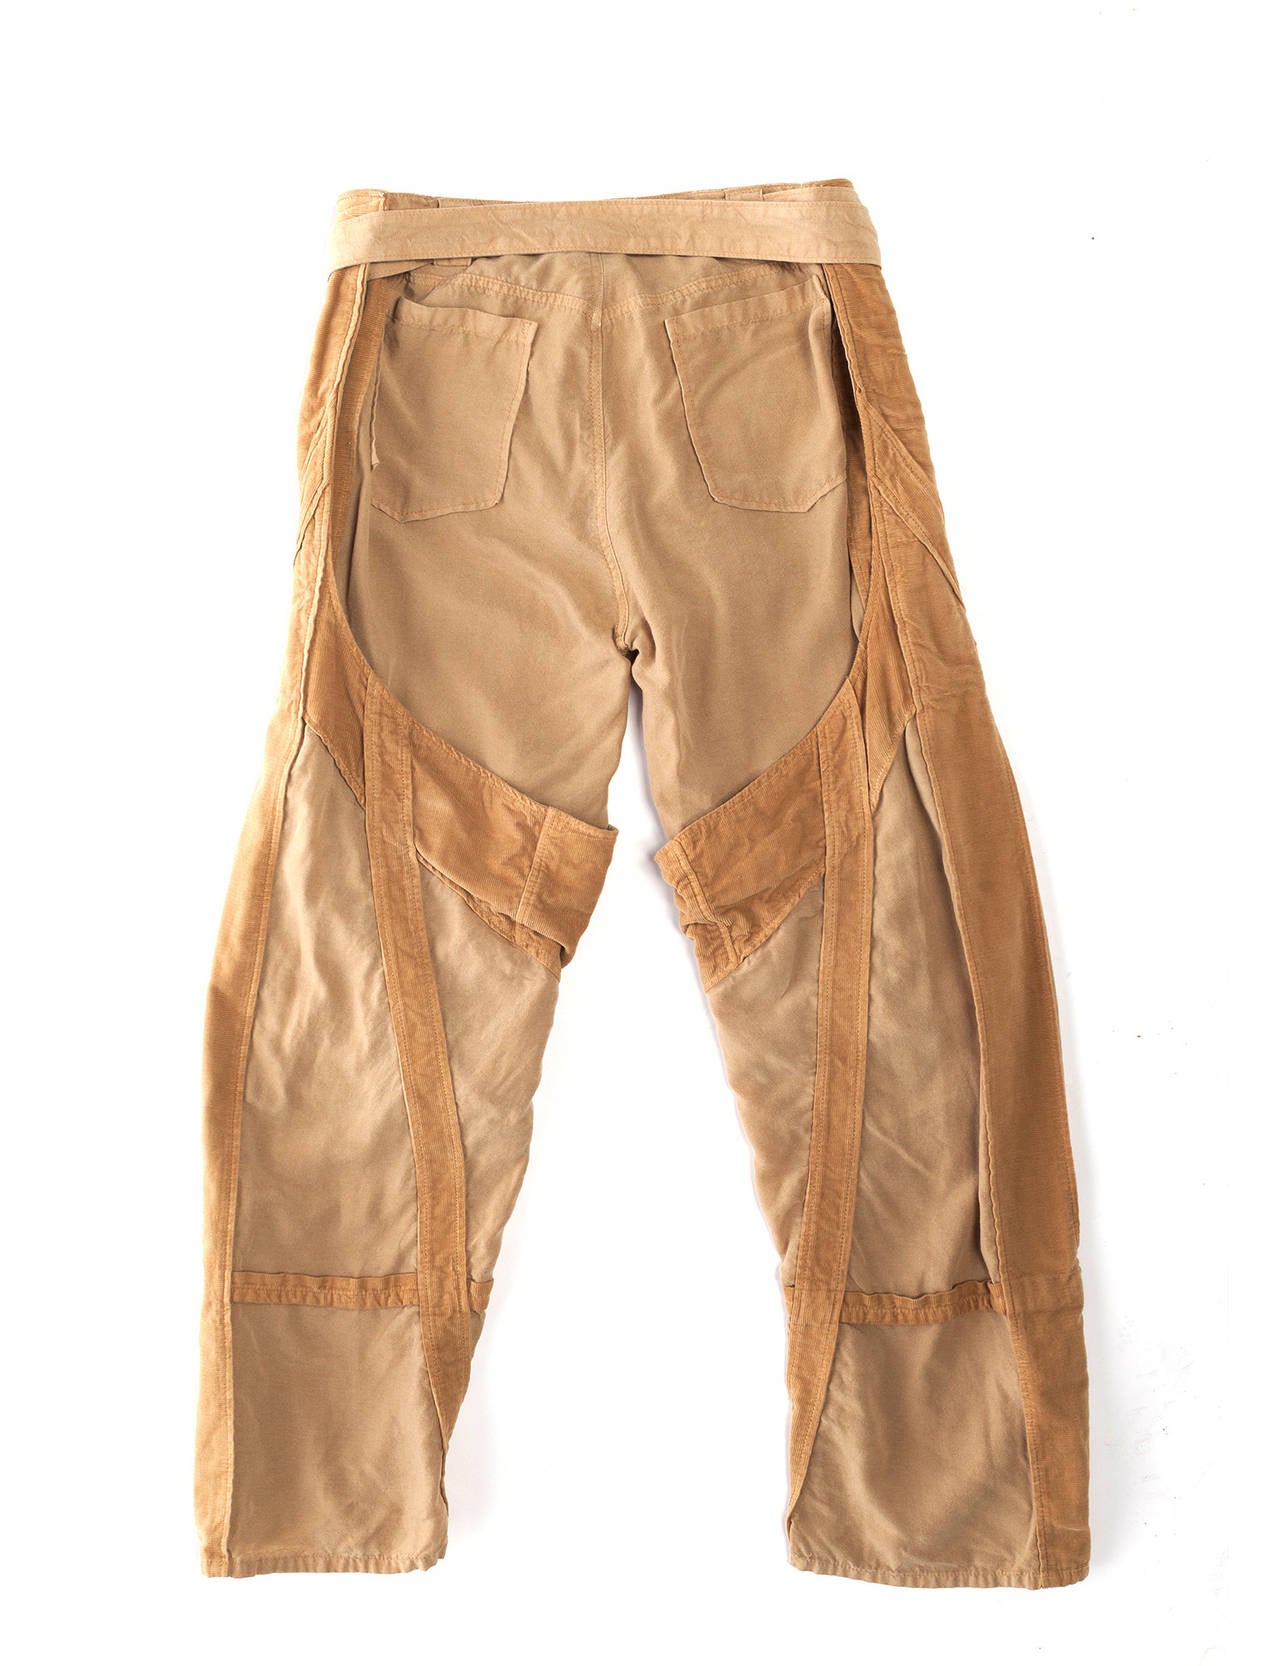 Pants have multi details and are in 2 contrasting fabrics, the details are in a sand colored corduroy, with multi pockets and loops, extra long sash for double belting, cropped and loose fit.